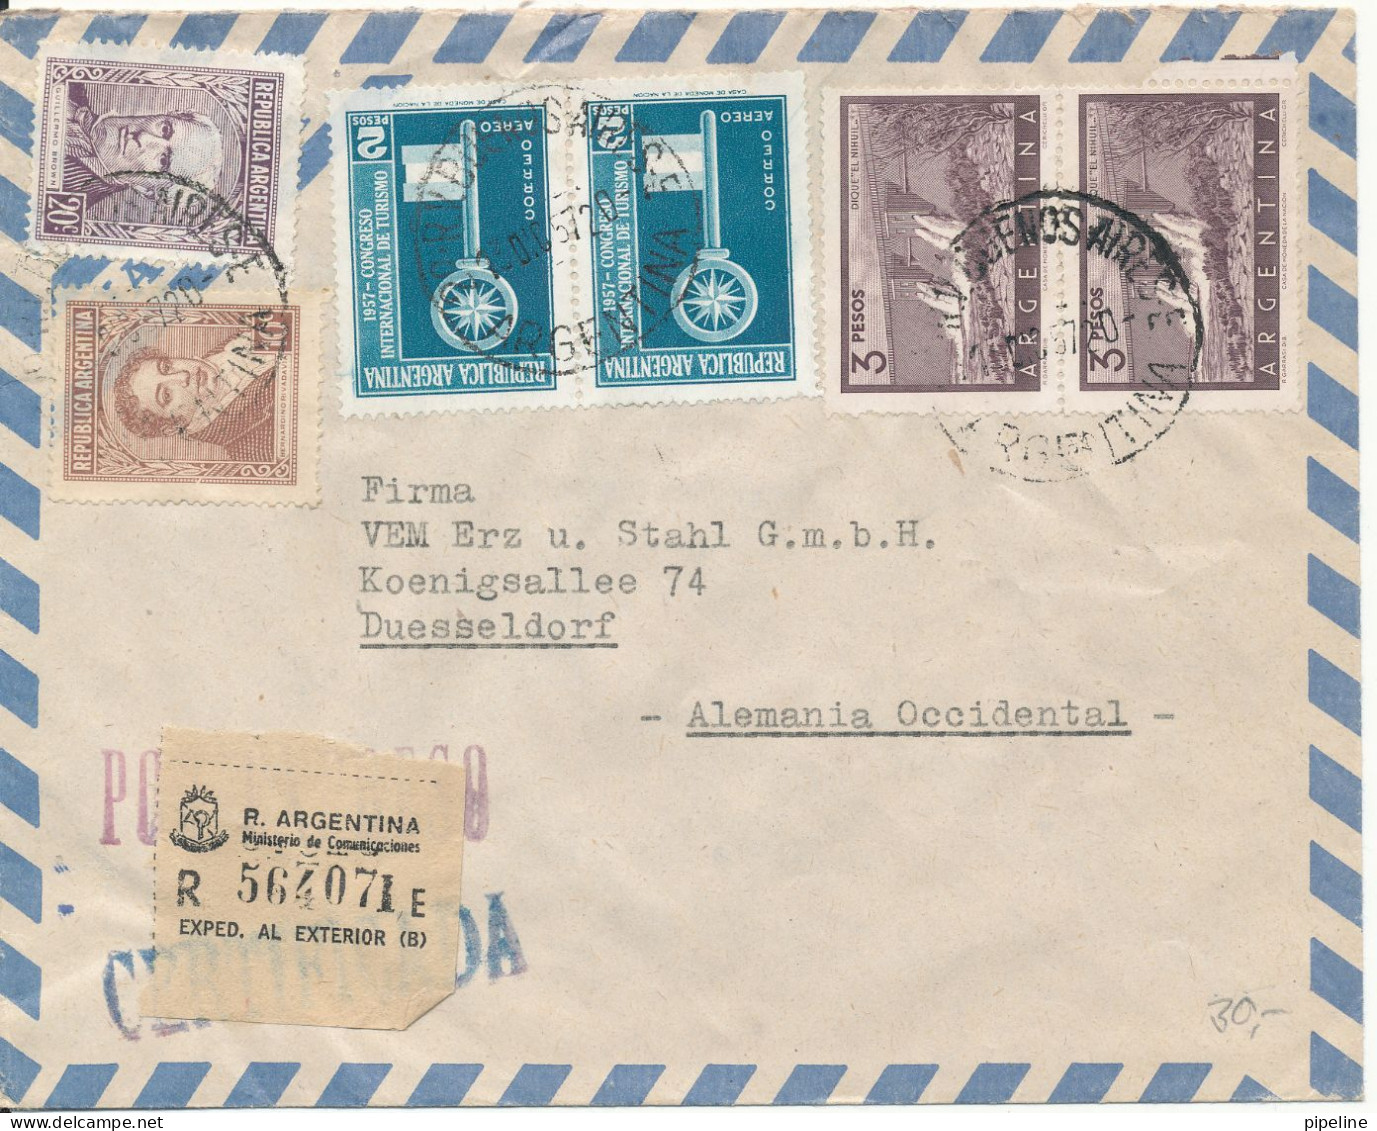 Argentina Registered Air Mail Cover Sent To Germany 23-12-1957 - Aéreo